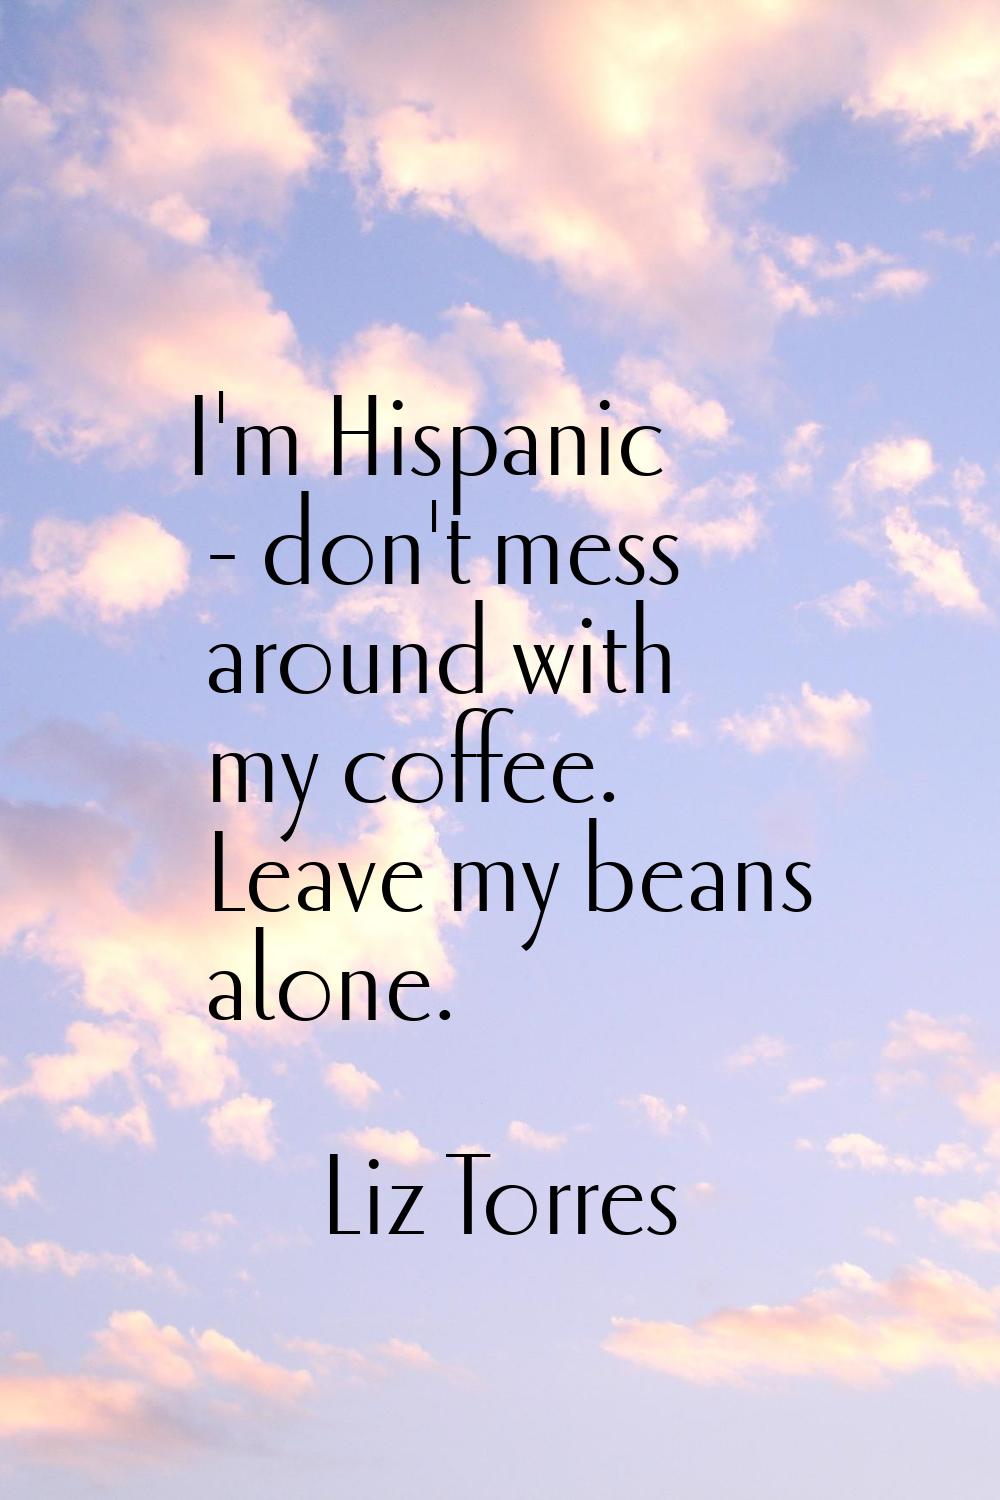 I'm Hispanic - don't mess around with my coffee. Leave my beans alone.